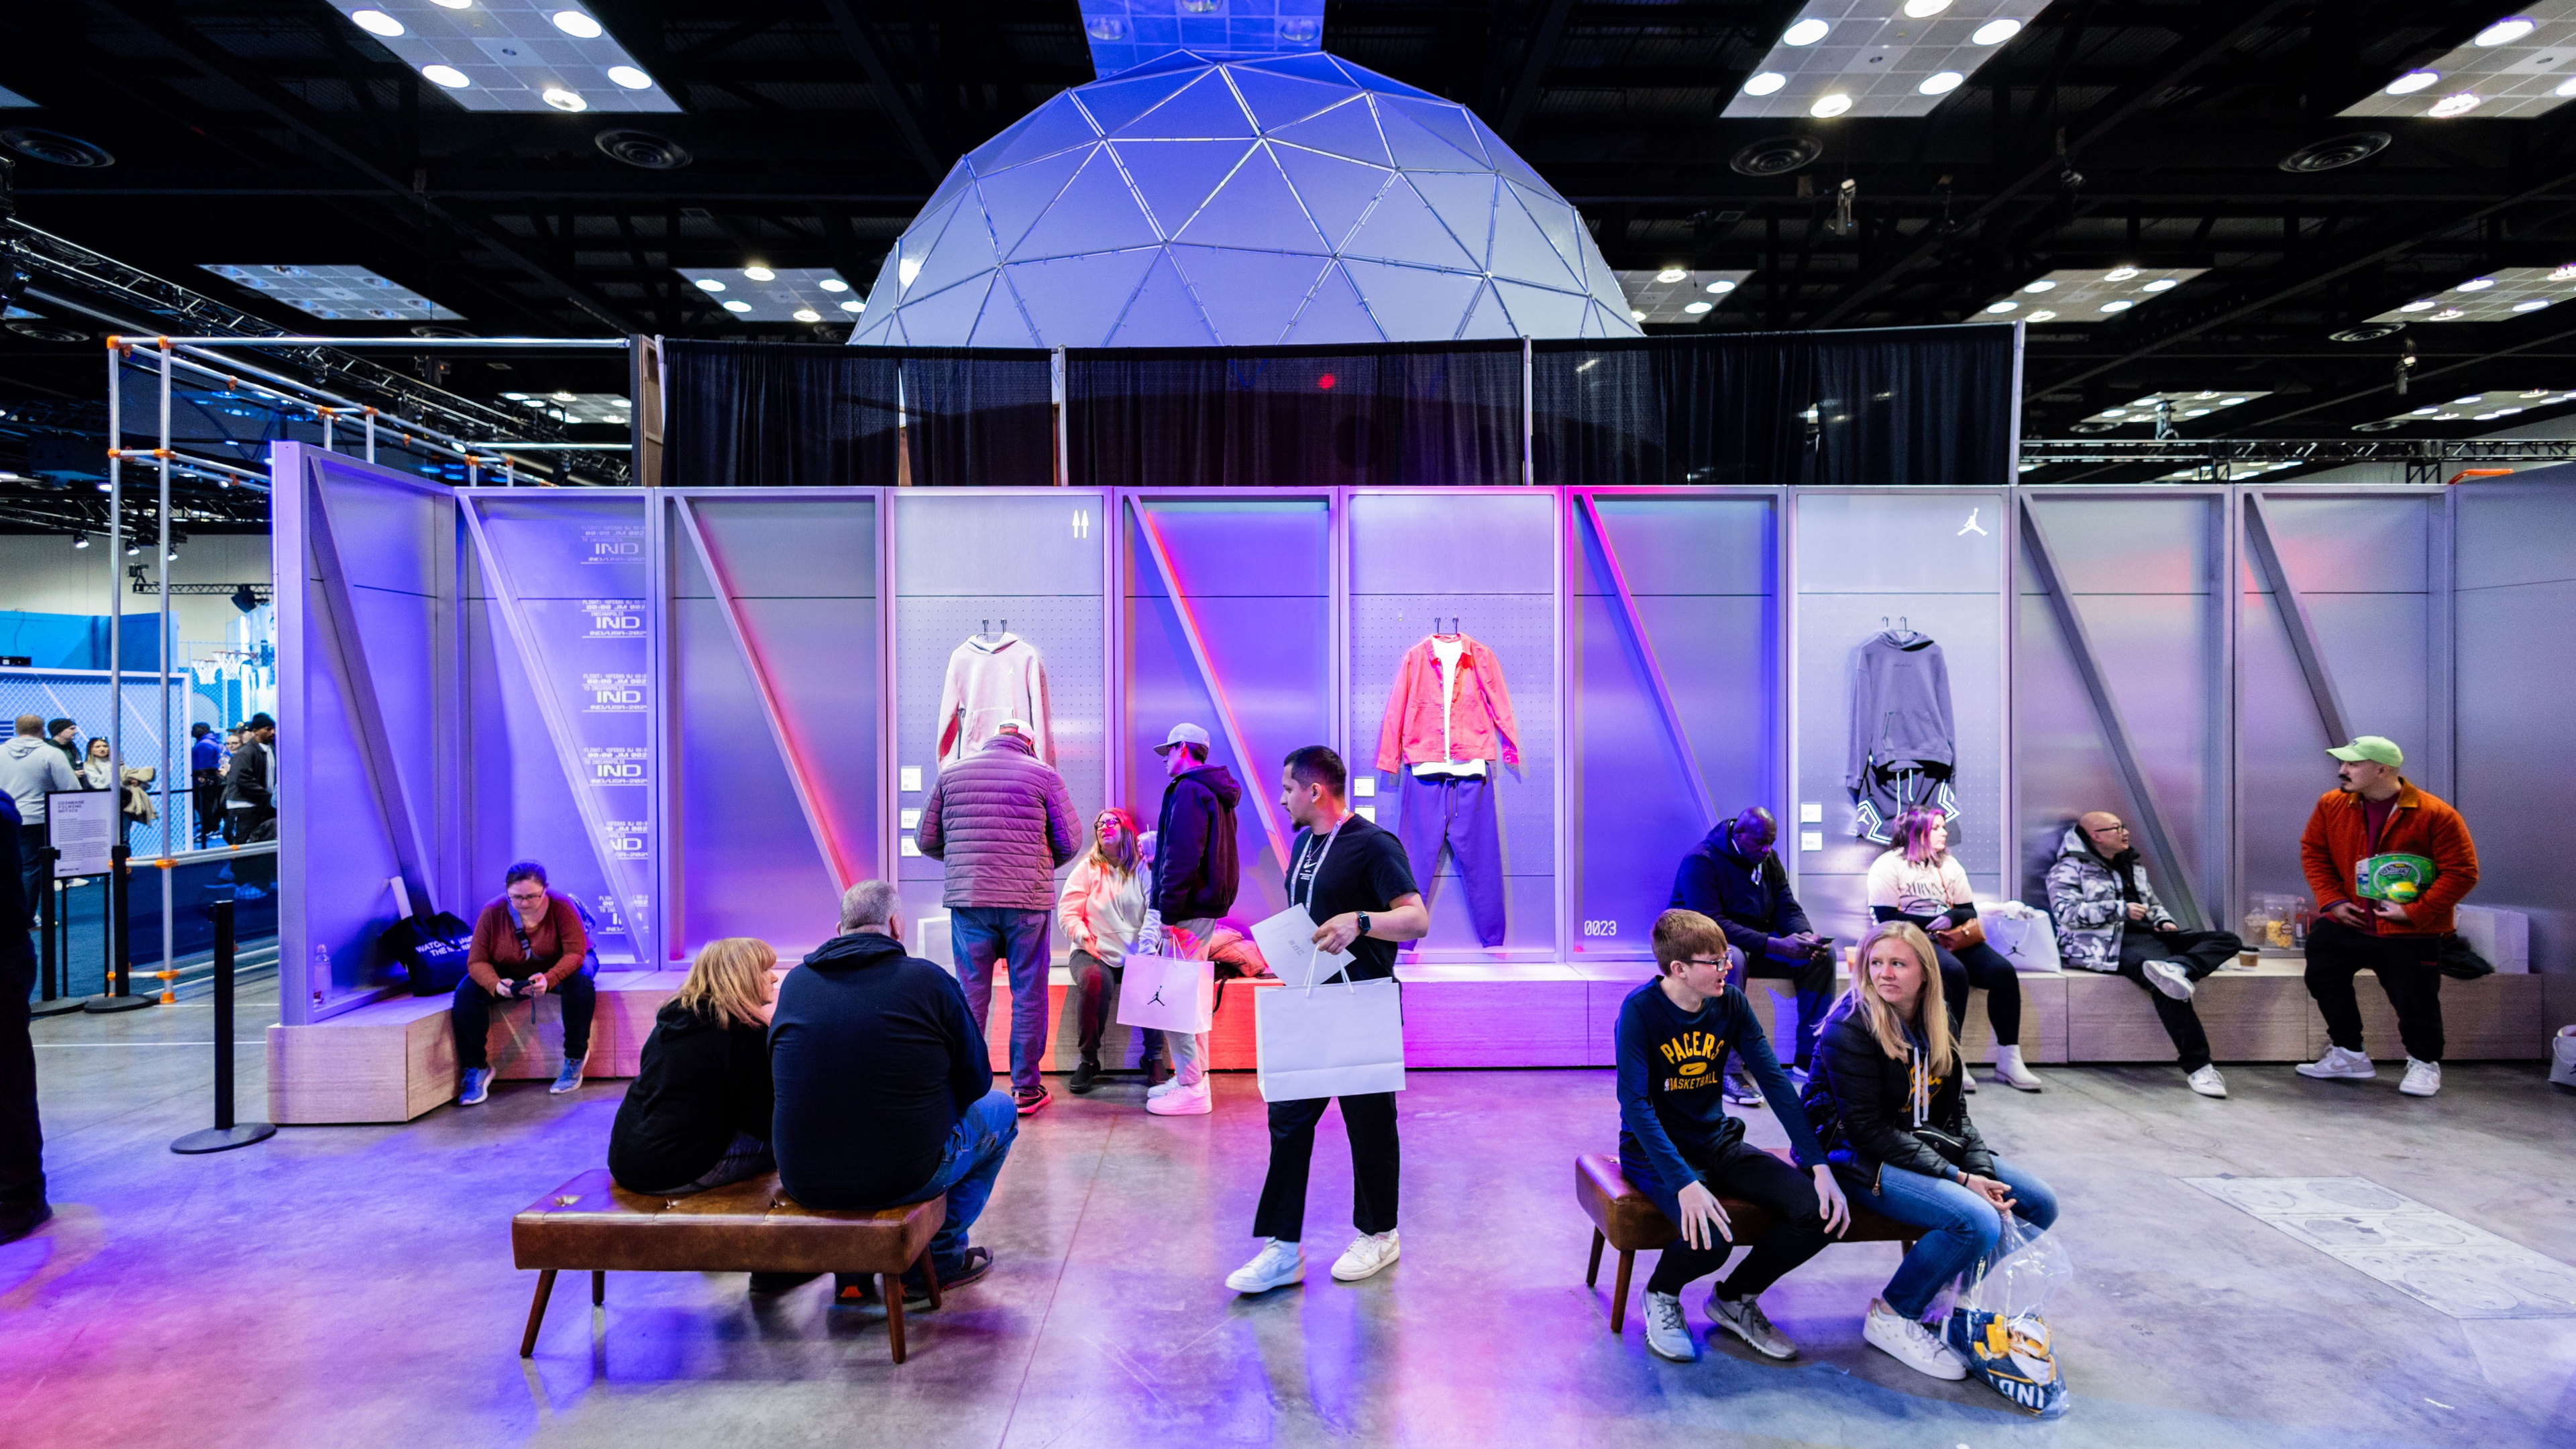 People gathered at a brand activation sitting down with sports wear modelled on mannequins 